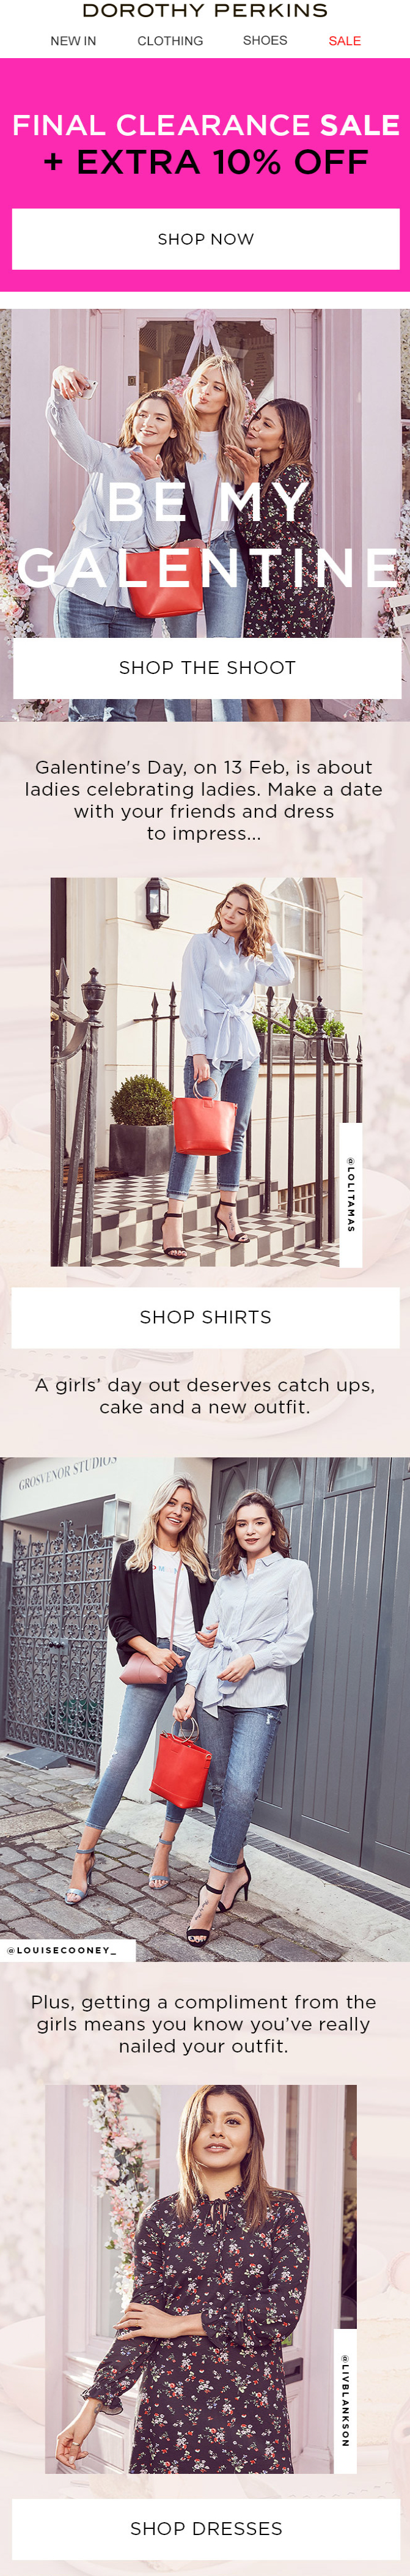 An email dedicated to Galentine’s Day from Dorothy Perkins